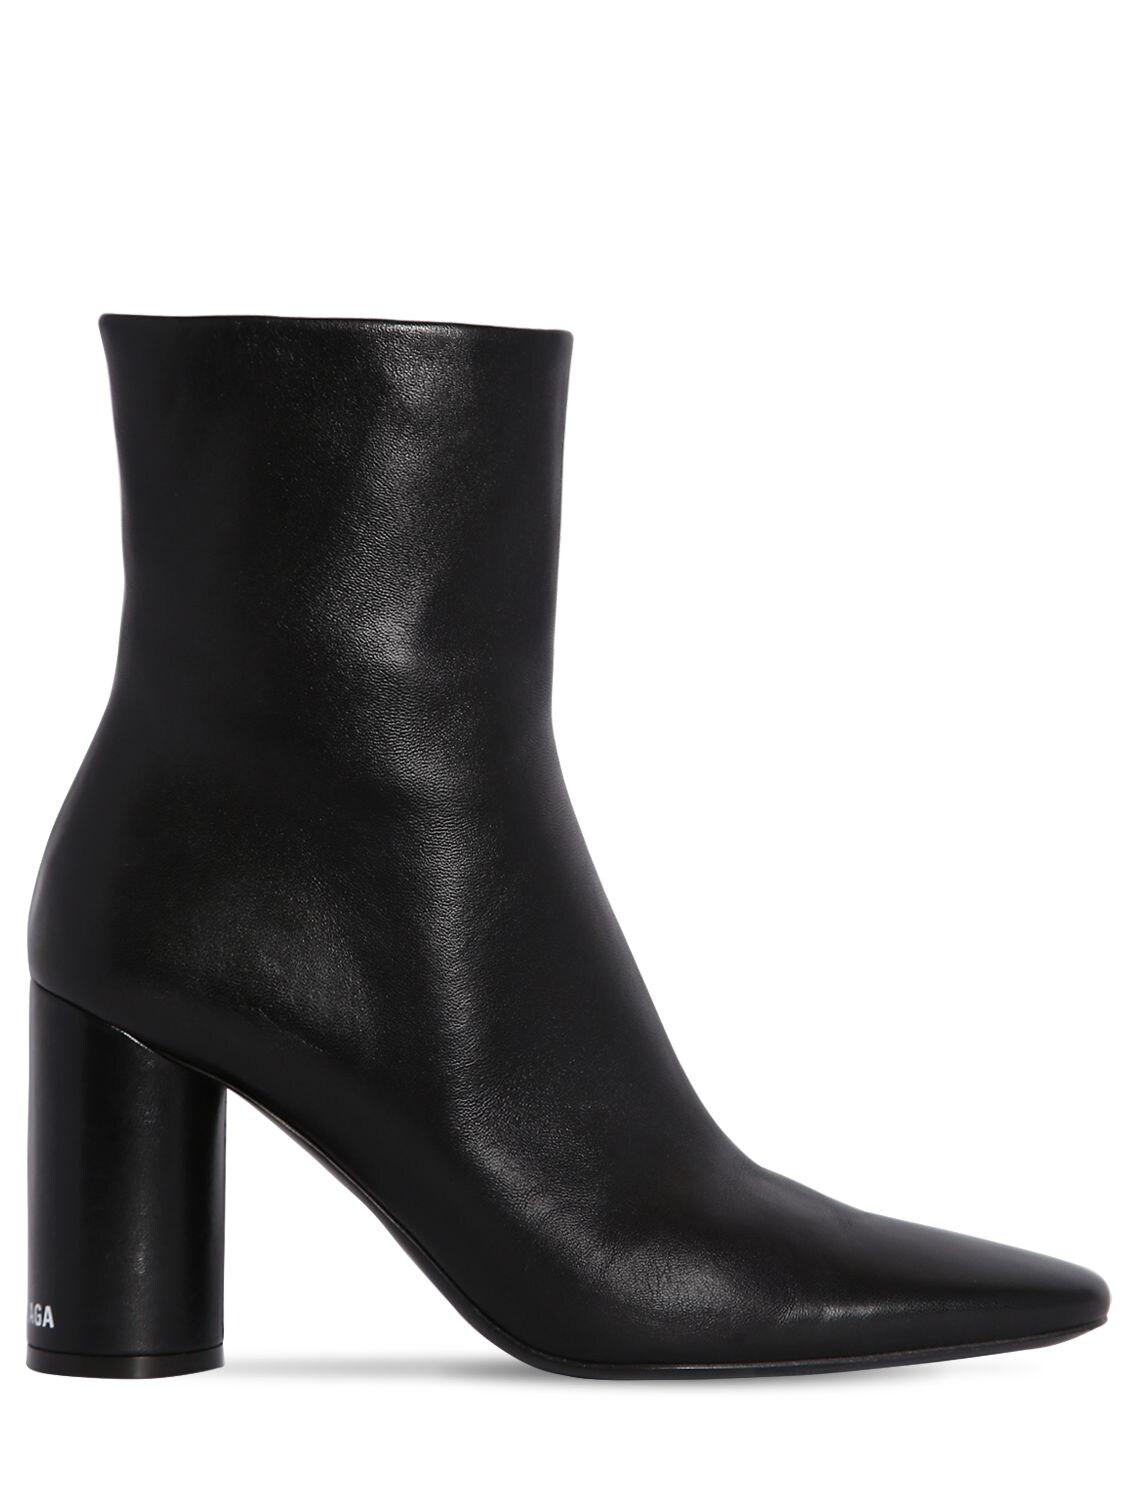 Balenciaga 90mm Oval Leather Ankle Boots in Black/White (Black) - Lyst